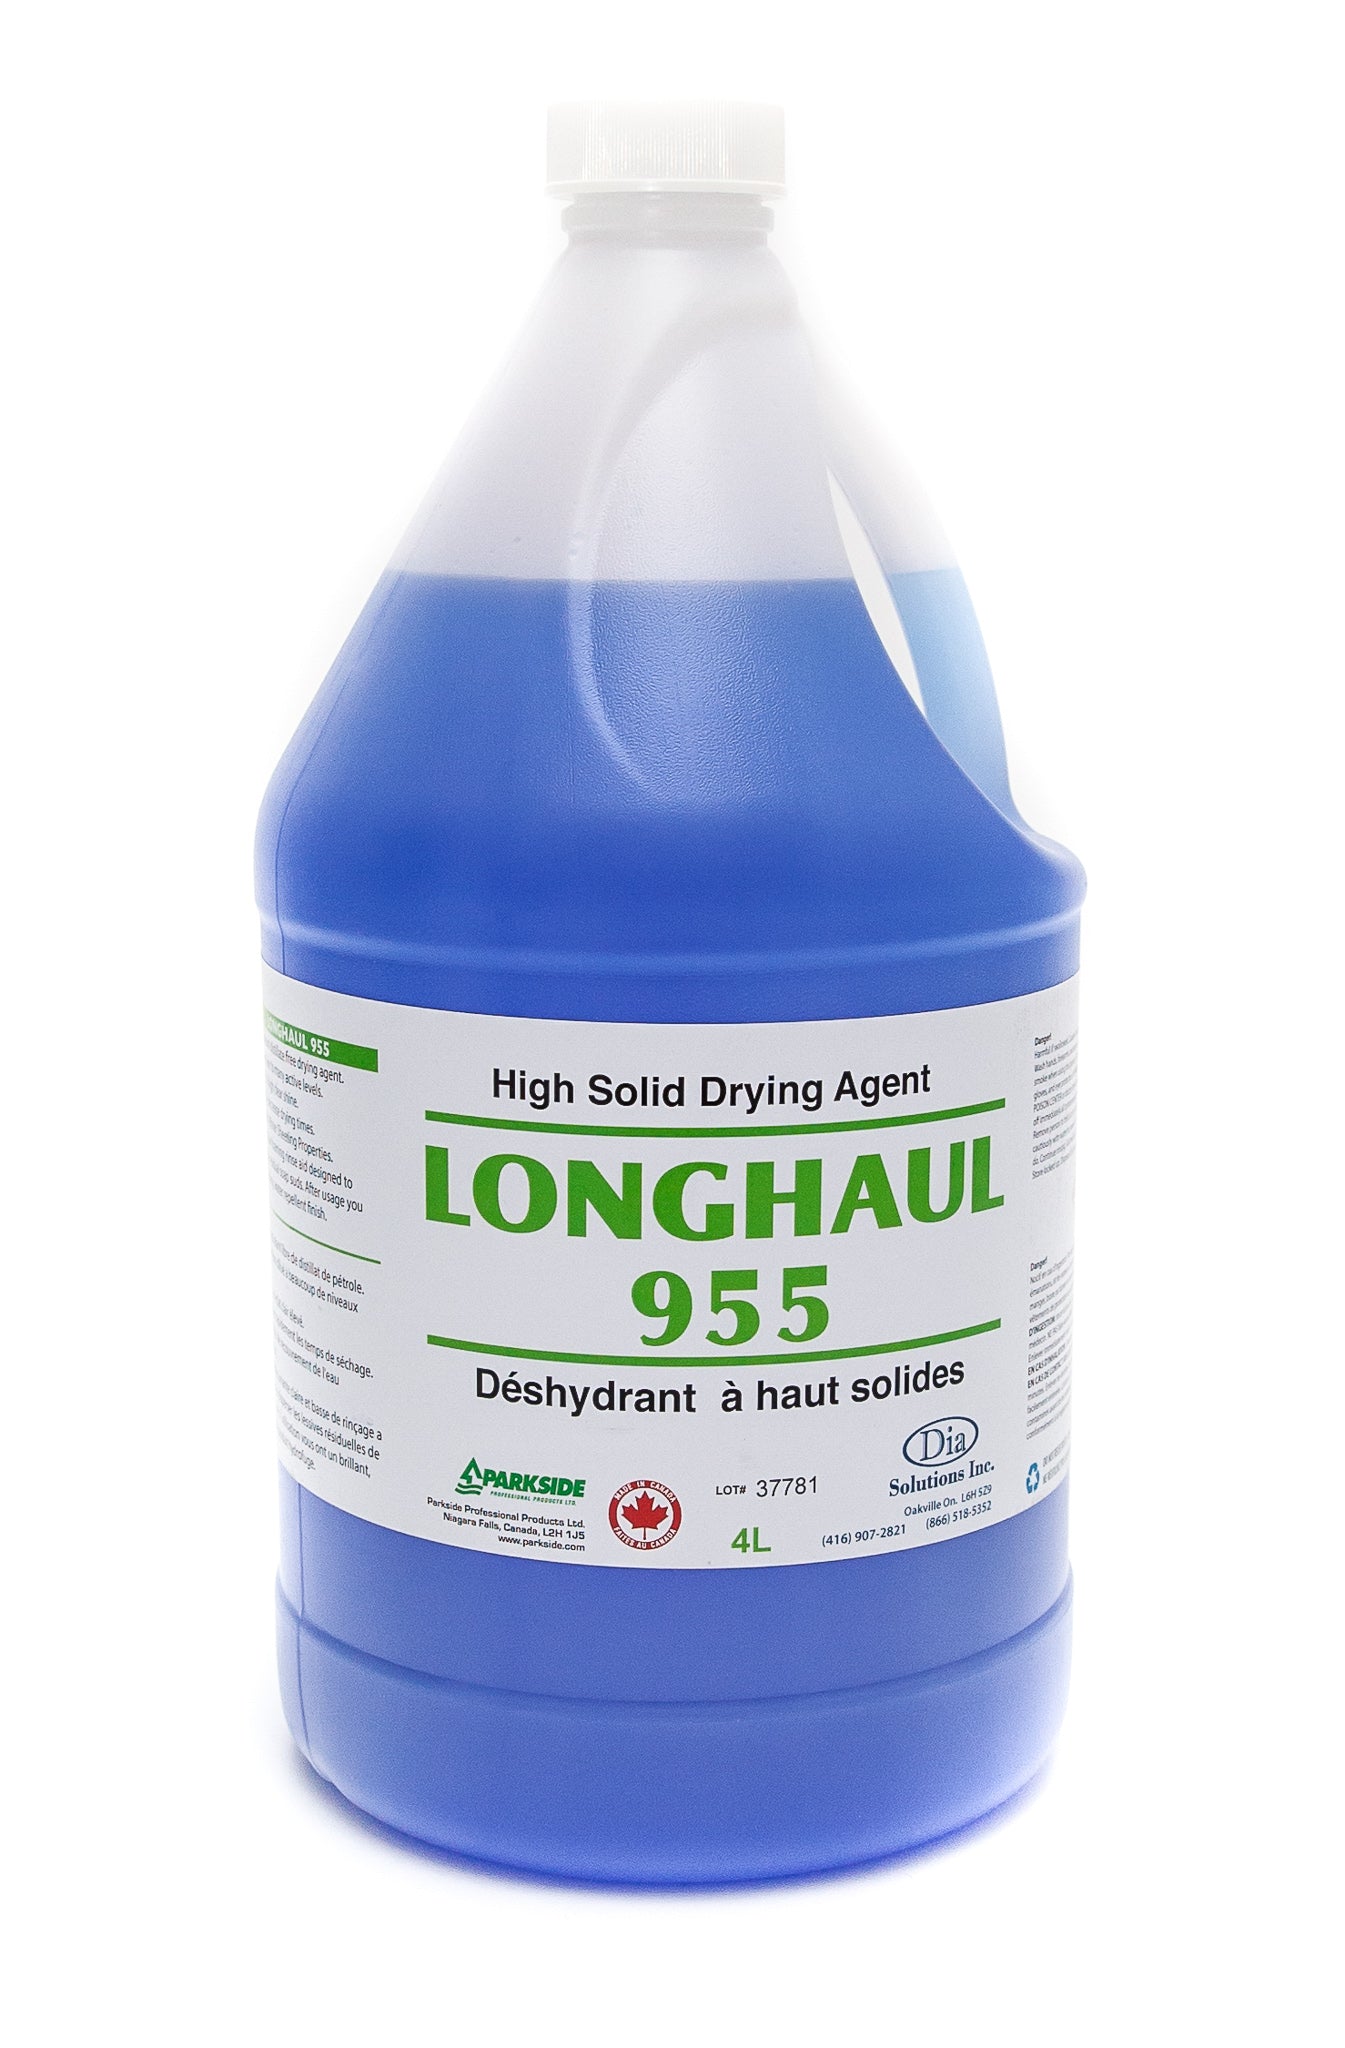 Longhaul 955 - High Solid Drying Agent